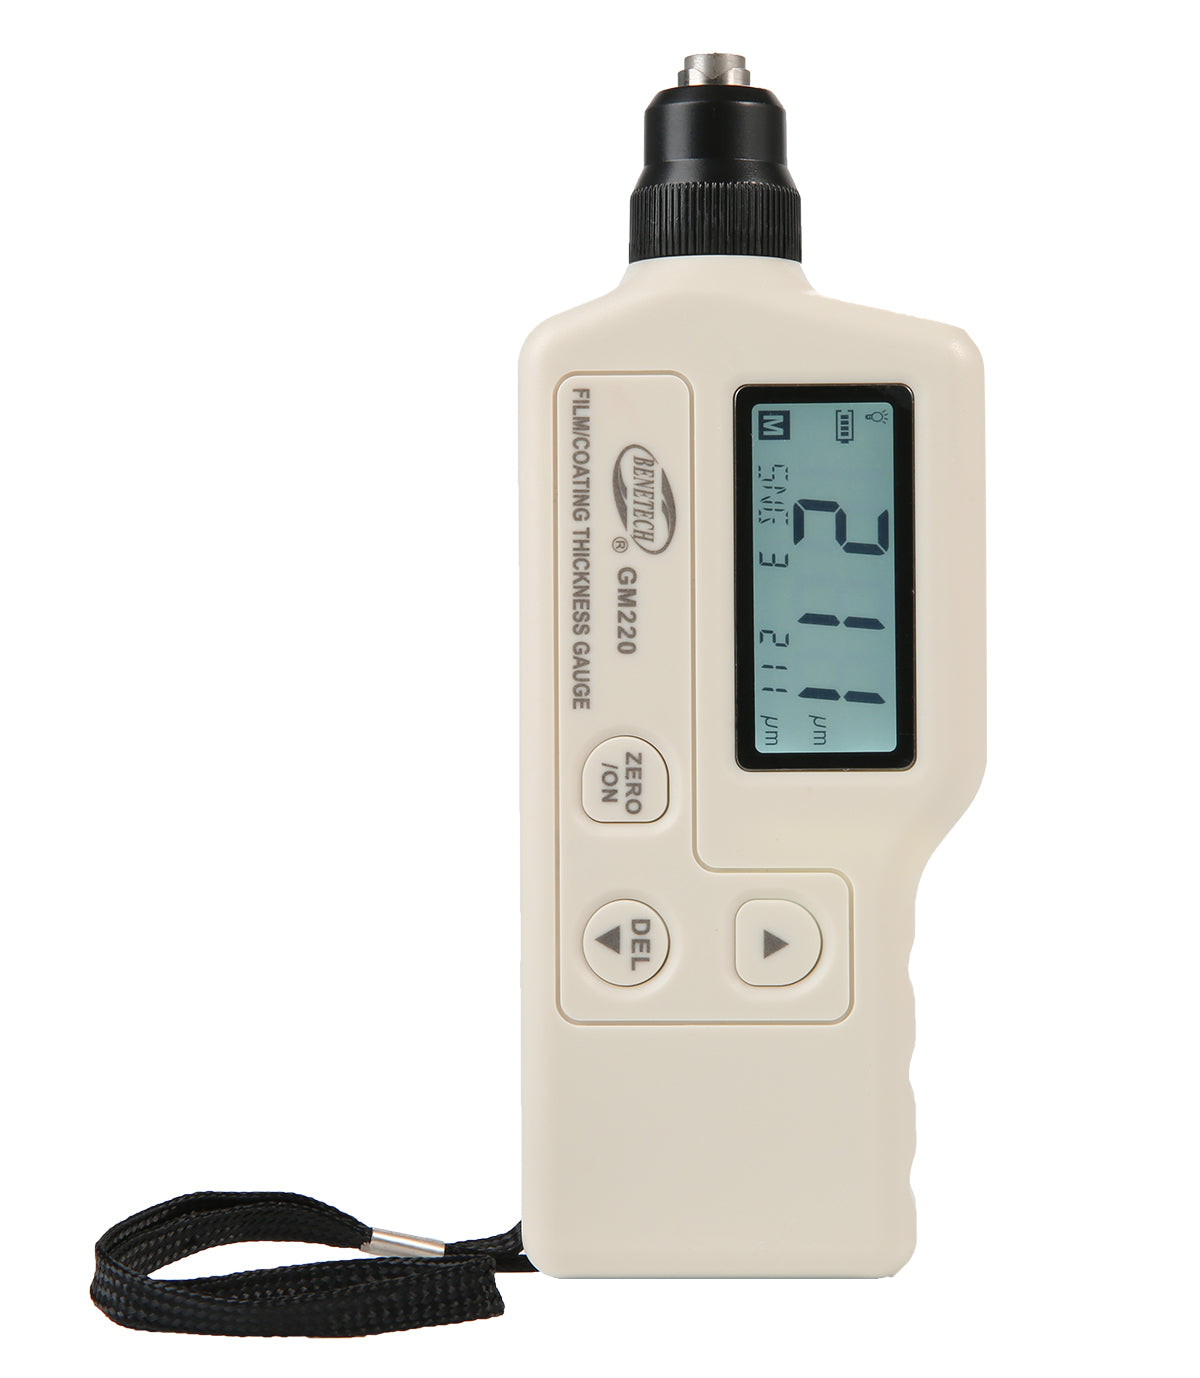 Benetech GM220 Digital Iron Film Coating Thickness Gauge Meter For Magnetic Metals Coating Thickness